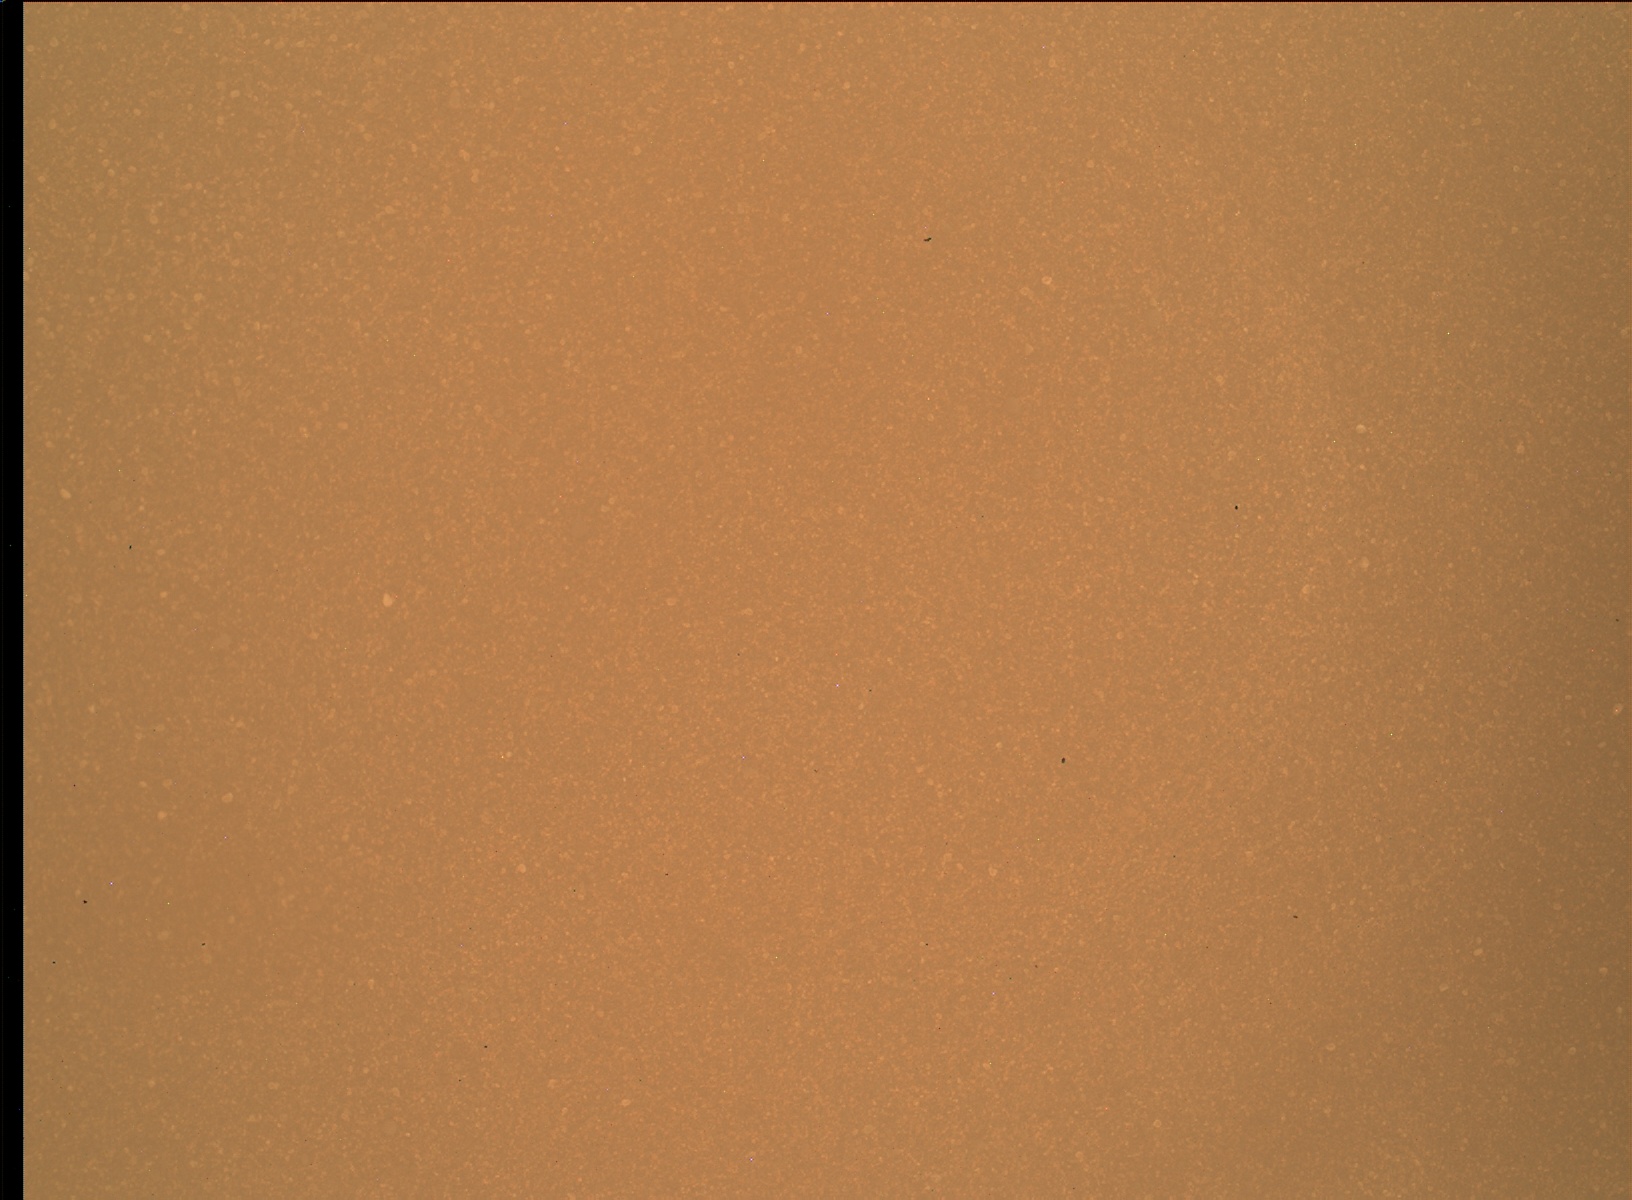 Nasa's Mars rover Curiosity acquired this image using its Mars Hand Lens Imager (MAHLI) on Sol 1638